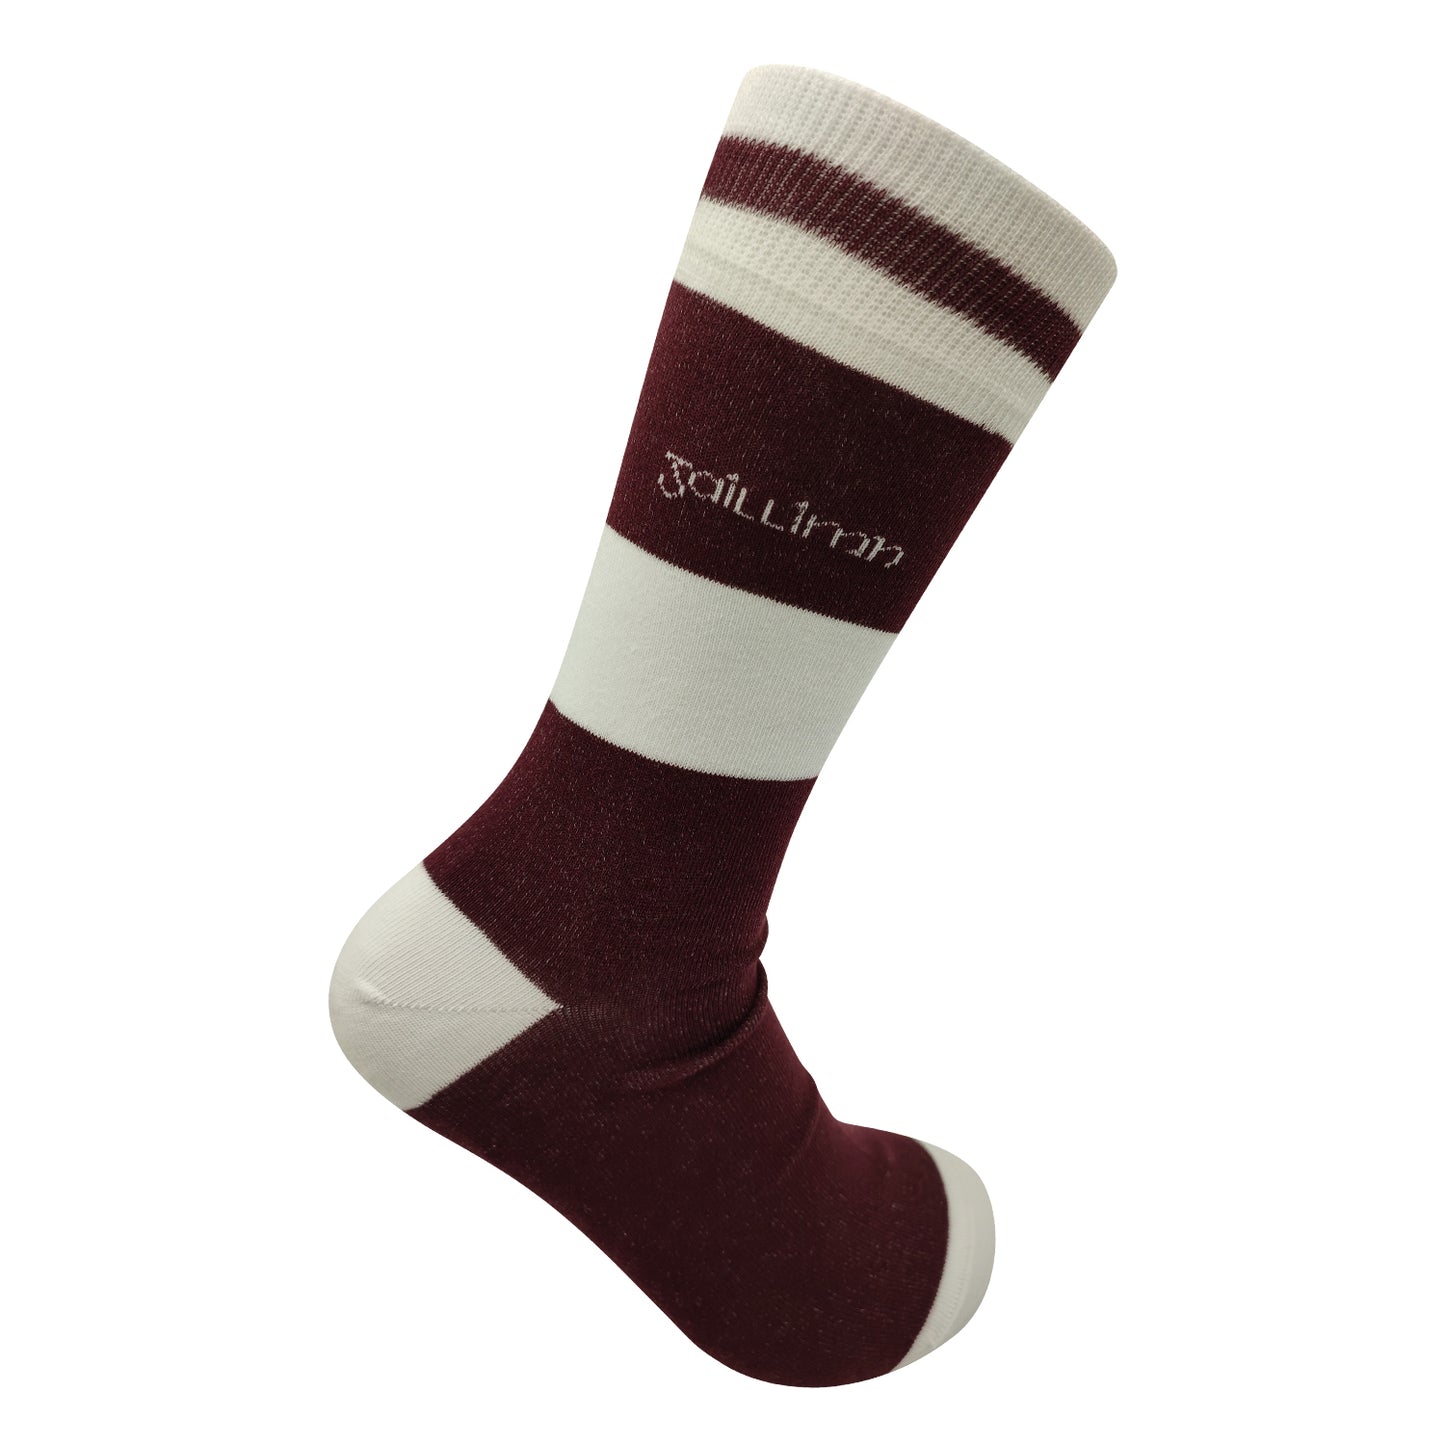 Galway Retro Sock Gift Box | Signed By Padraic Mannion | Size UK 7 - 11